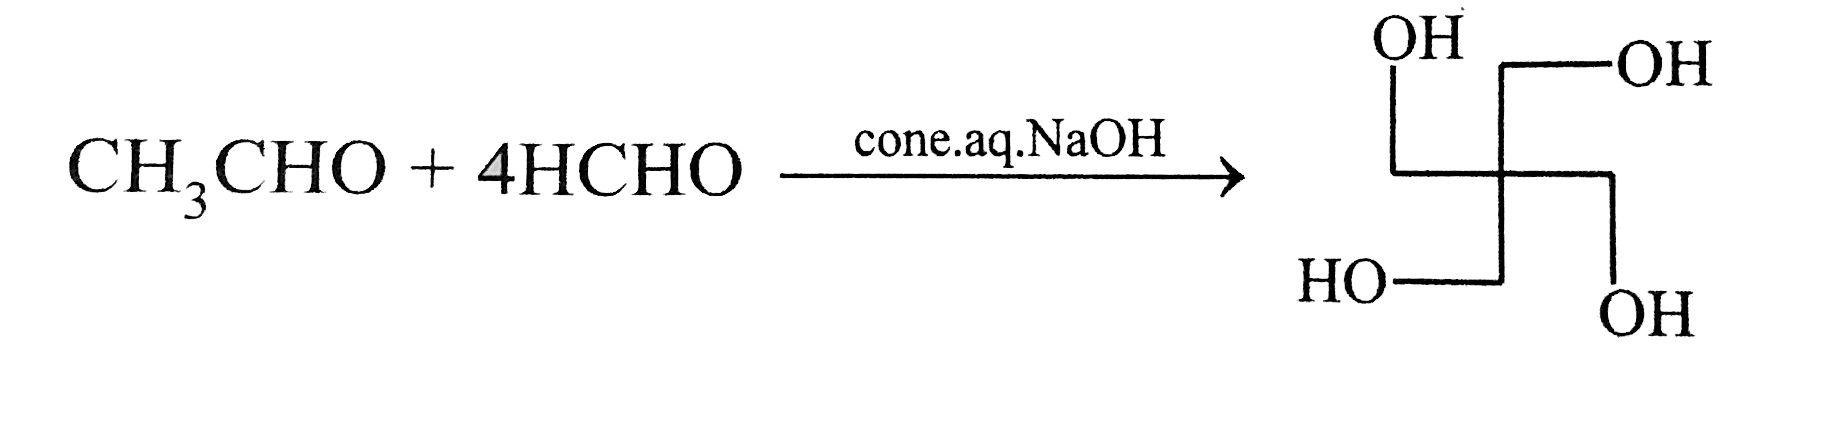 The number of aldol reaction (s) that oscurs in the given transformation is   CH(2) CHO + 4 HCHO overset (